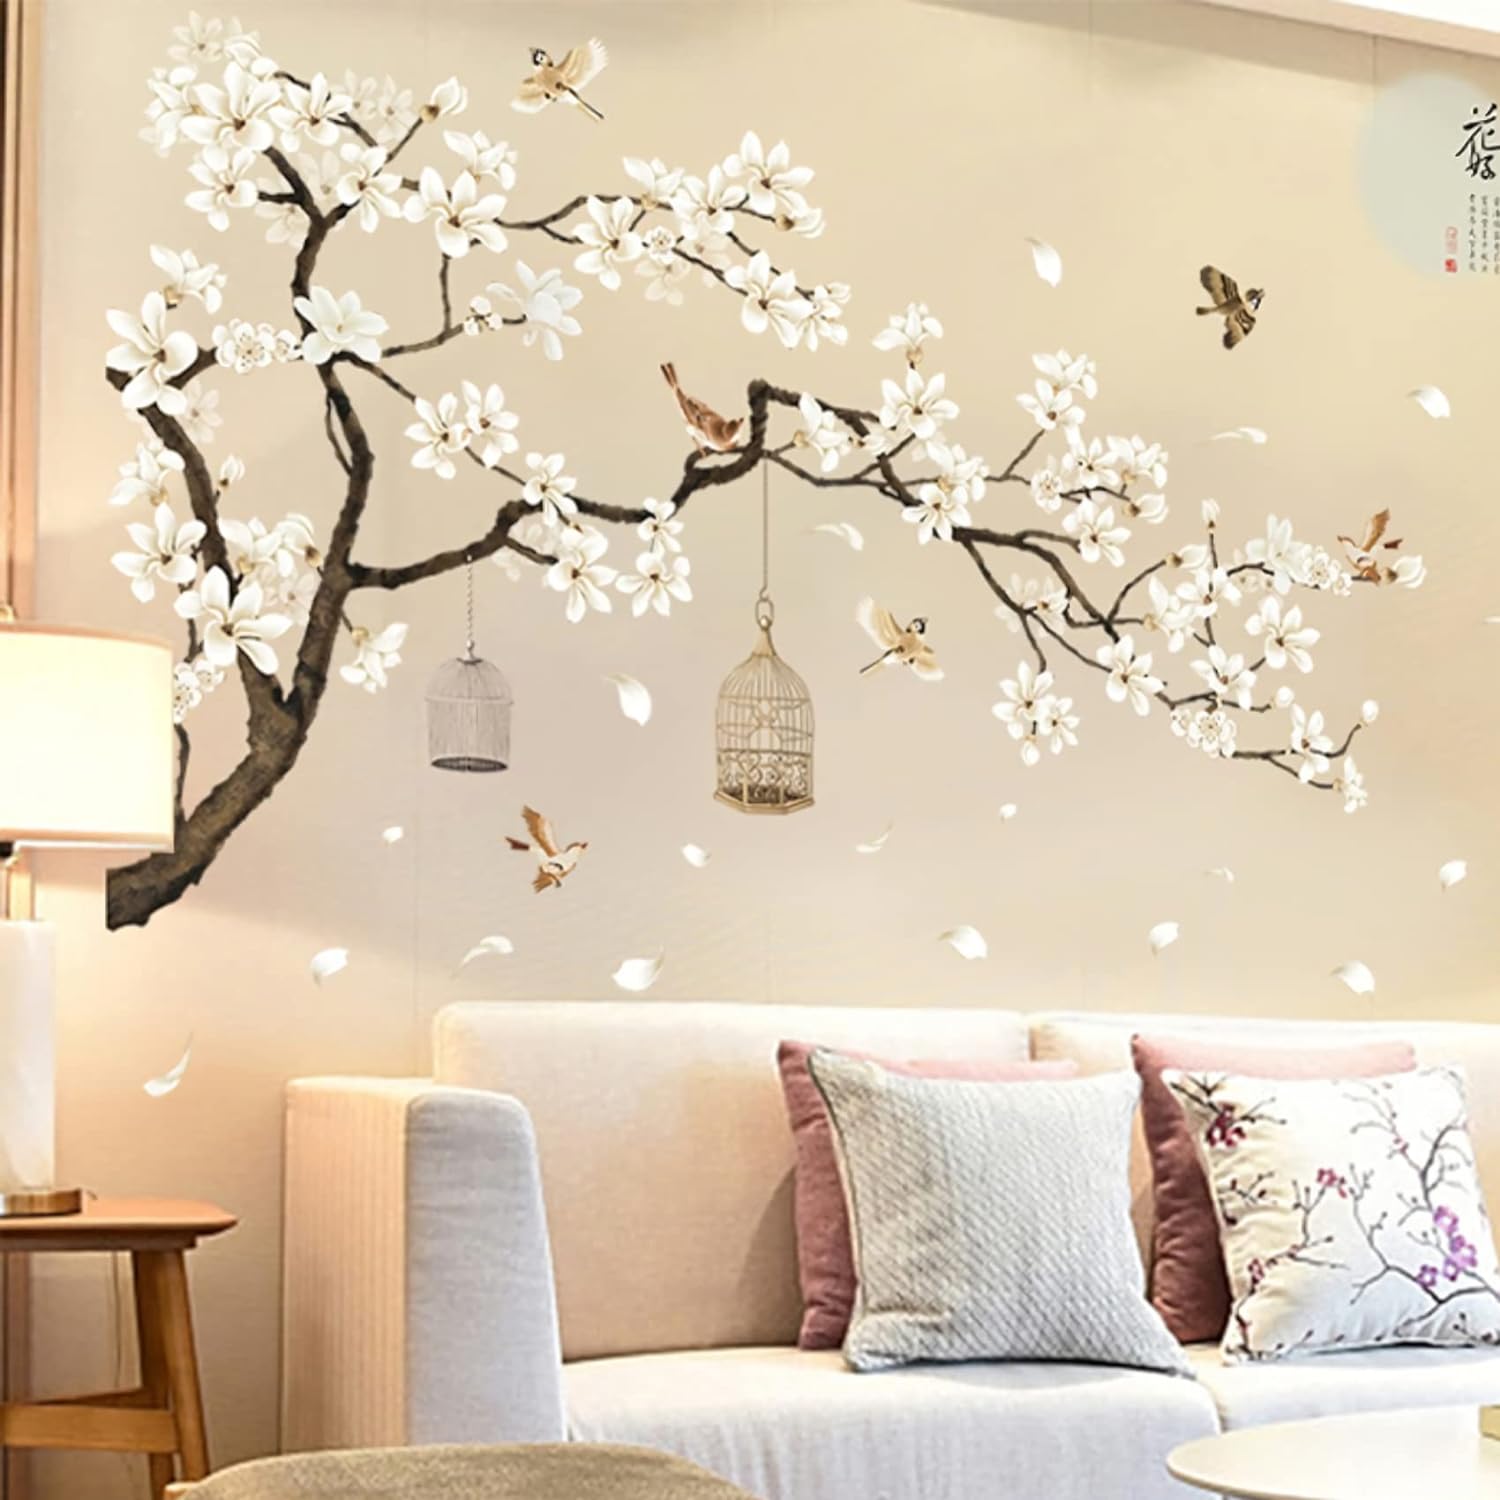 BWCXXZH Large White Flower Wall Stickers, 50x74 Removable DIY Romantic Cherry Blossom Tree Wall Murals Peel and Stick 3D Wall Art Stickers Home Decor for Gilrs Bedroom Nursery Rooms Living Room